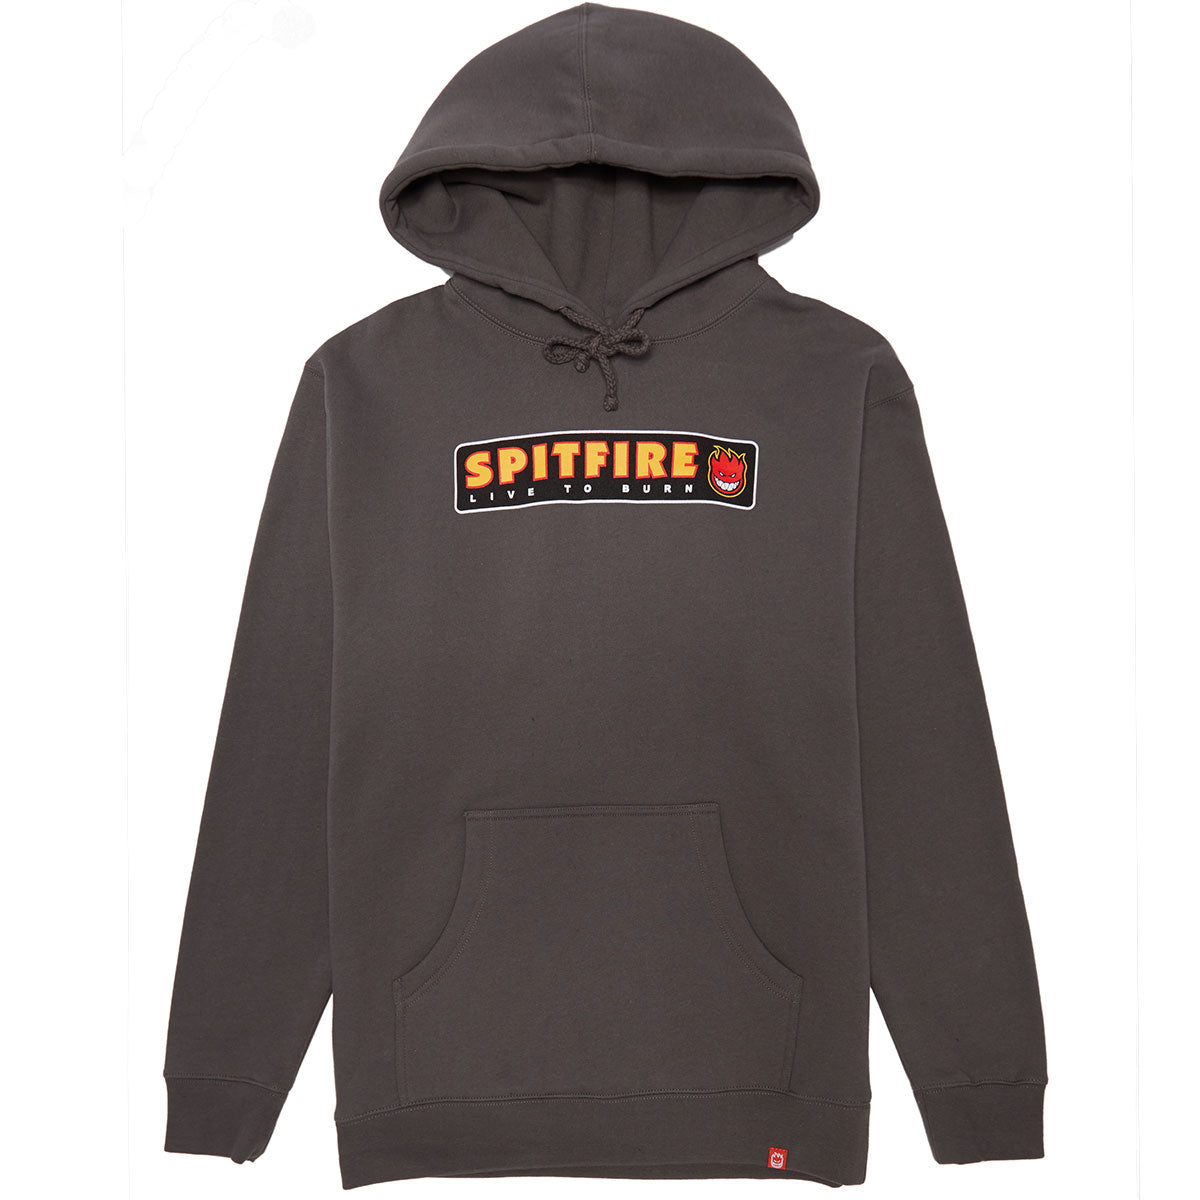 Spitfire Ltb Hoodie - Charcoal/Multi Color image 1